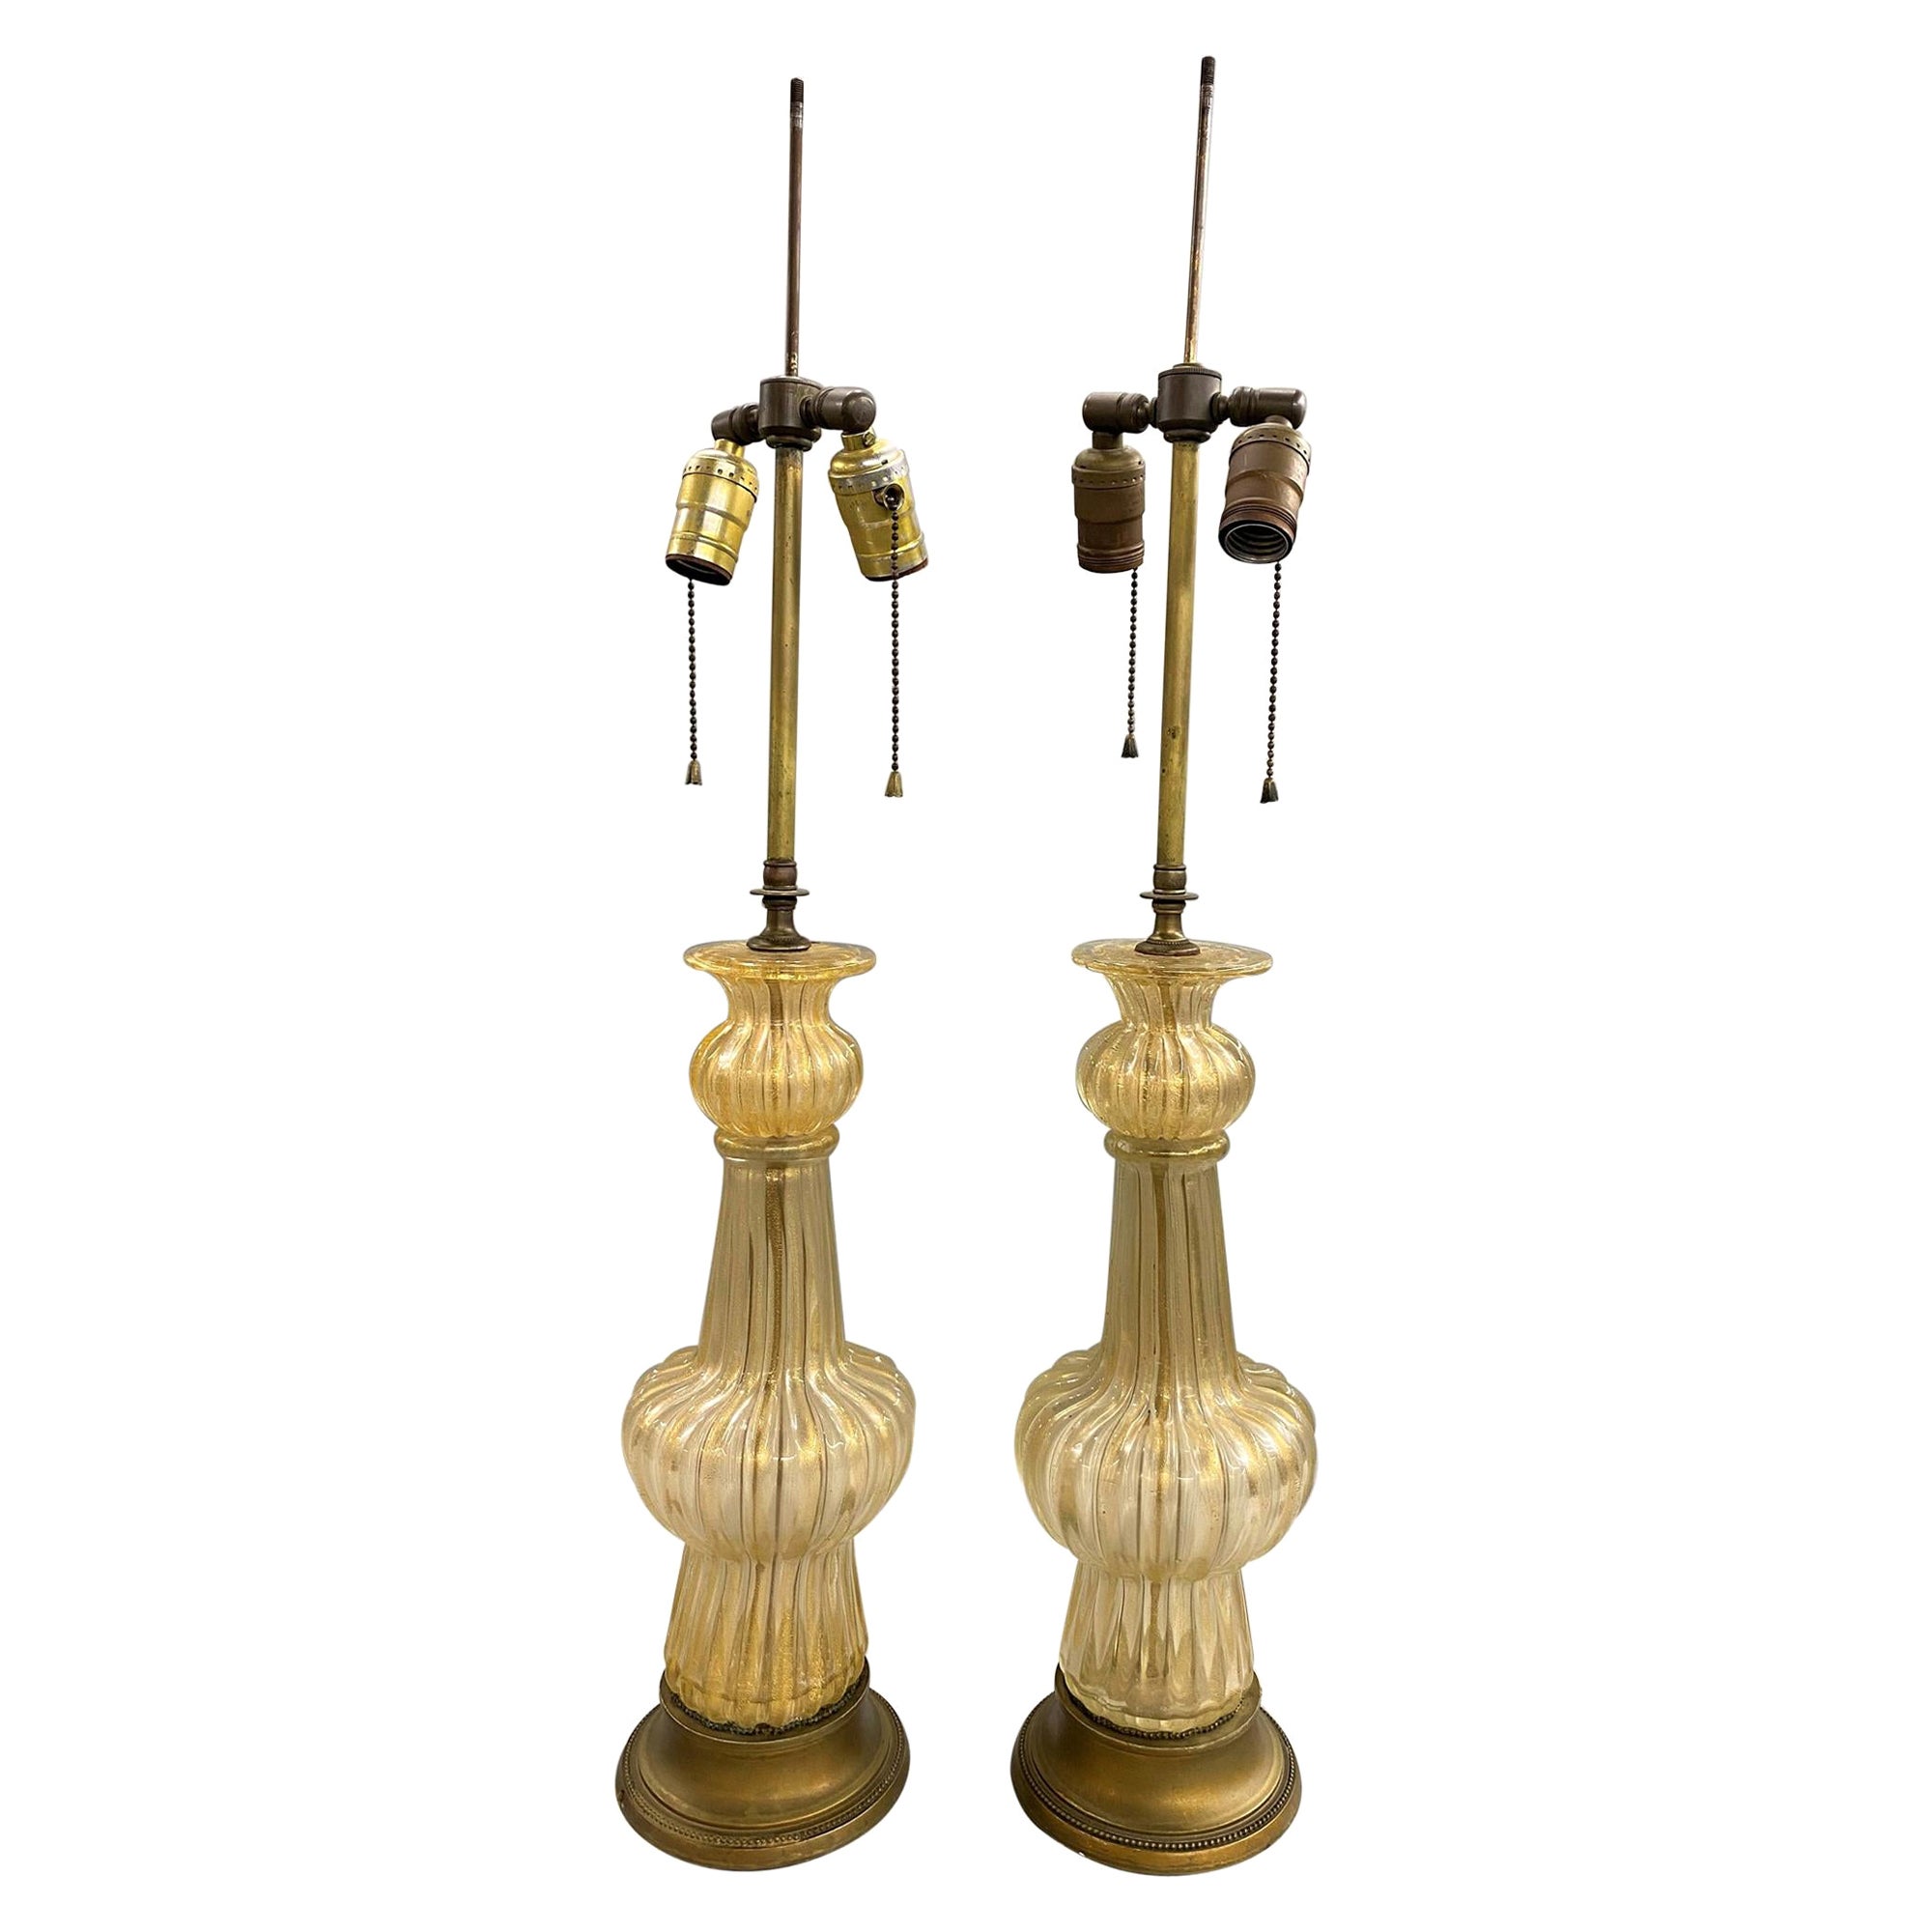 Pair of Barovier Venetian Glass Table Lamps with 22-Karat Gold Dust Inclusions